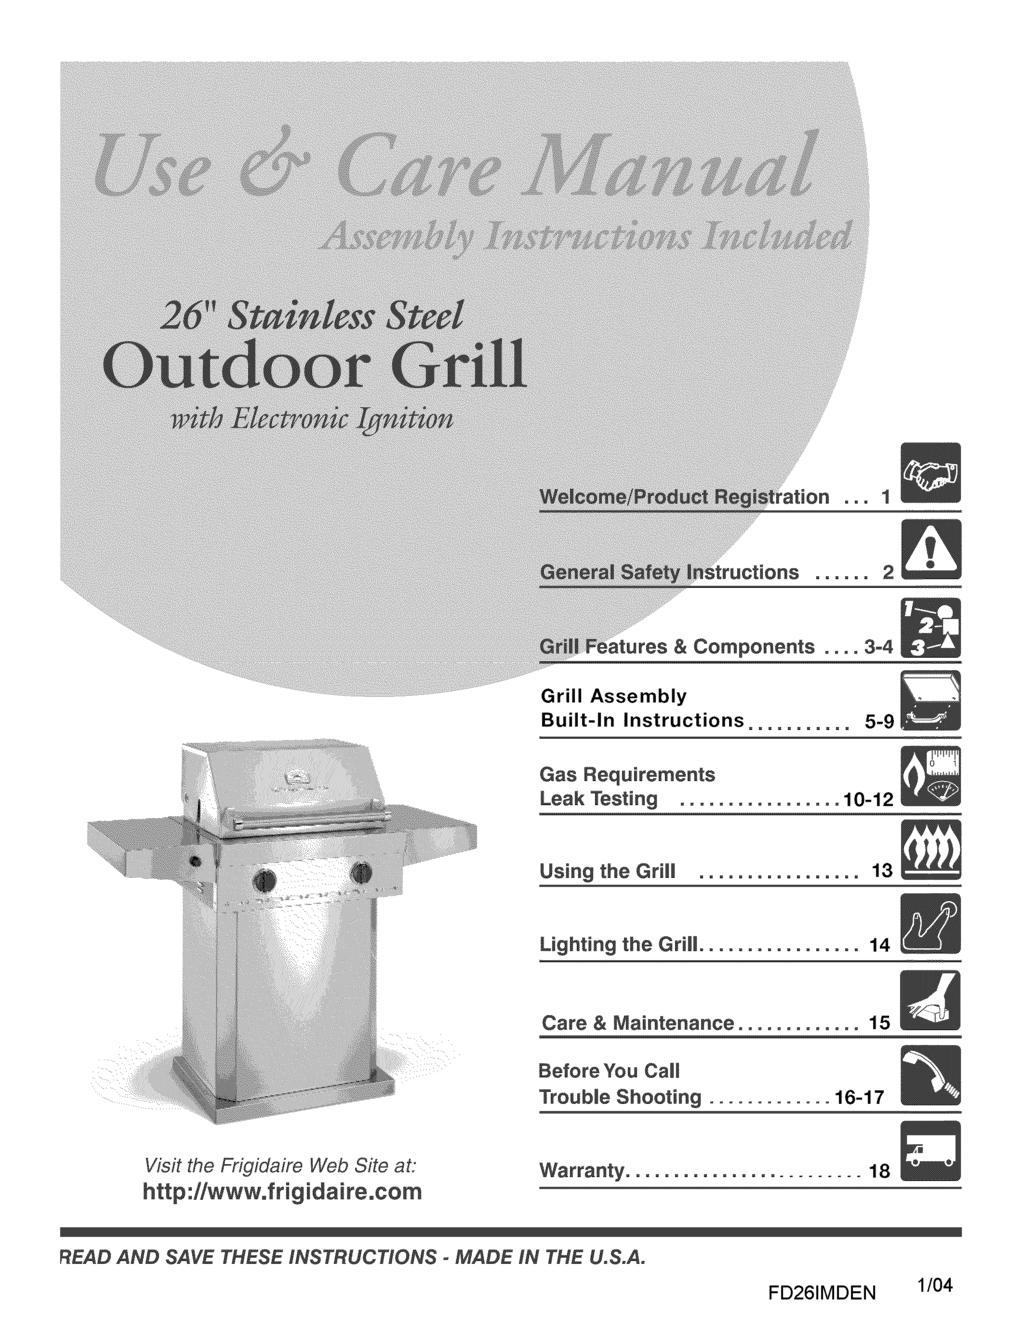 === 1 ====== 2 & Components 3 4 Grill Assembly Built-In Instructions 5-9 Gas Requirements Leak Testing 10-12 Using the Grill 13 Lighting the Grill 14 Care & Maintenance 15